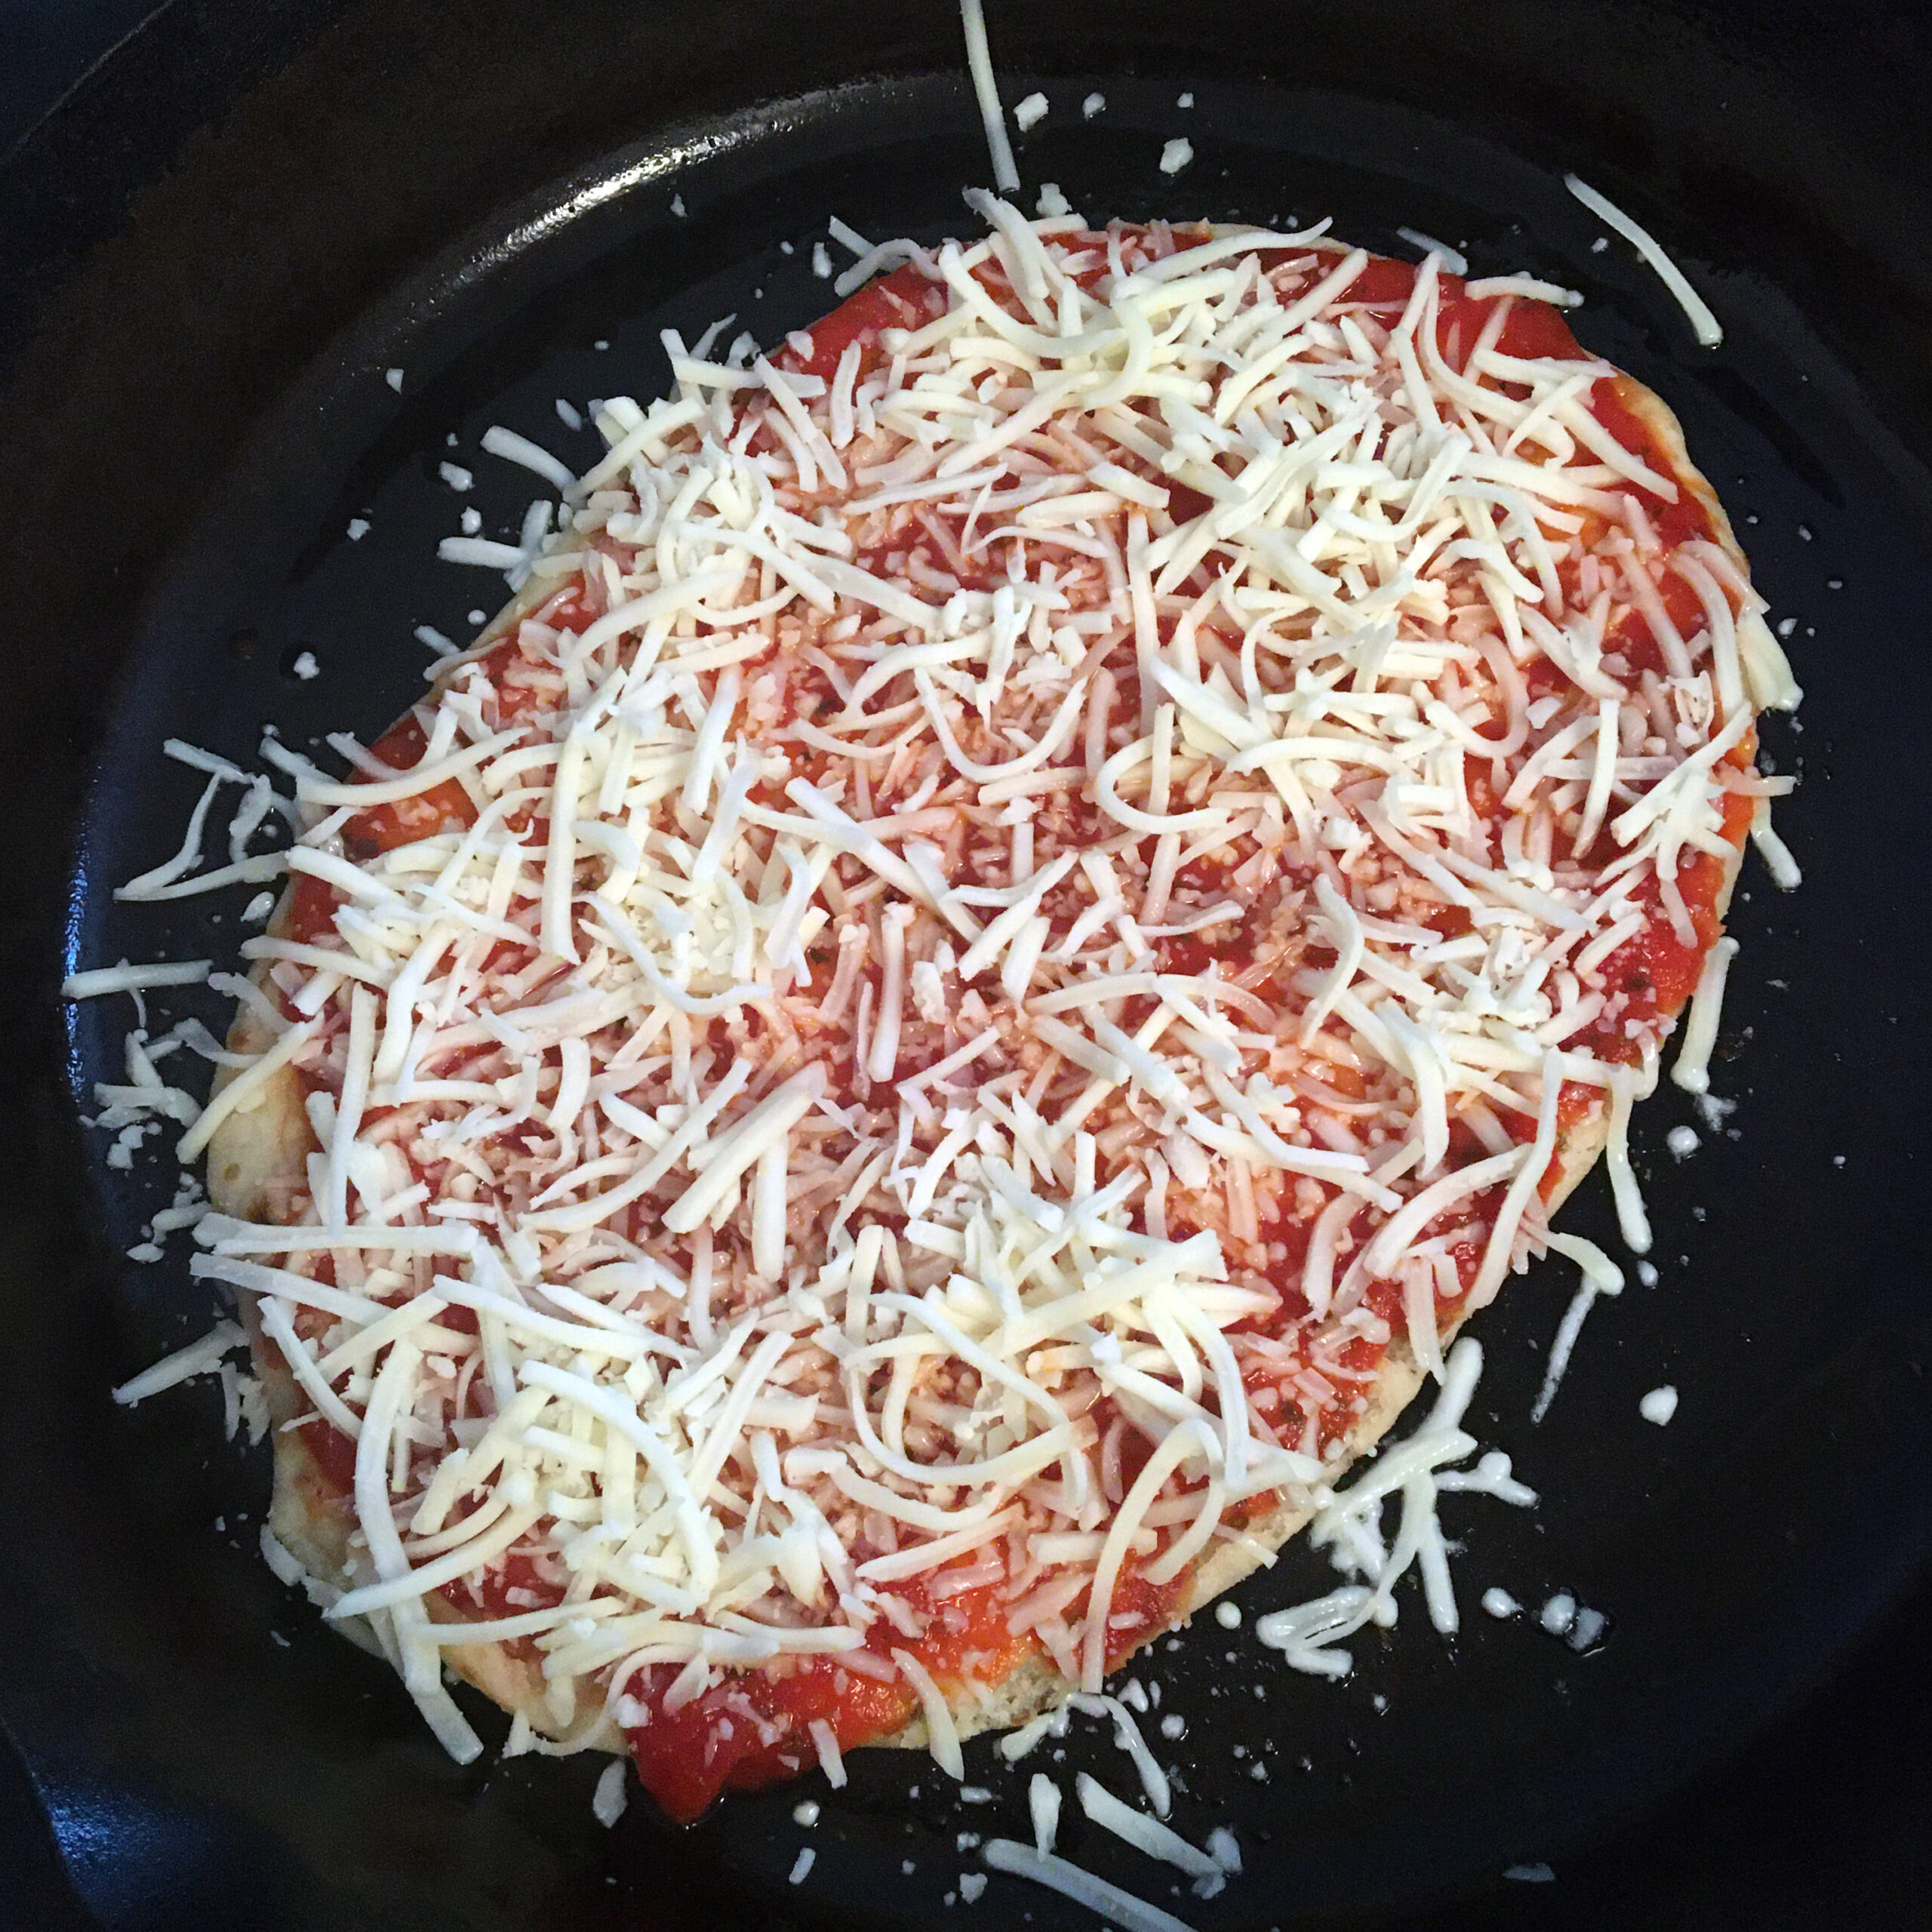 Need a quick and easy recipe that the kids will LOVE? Try this 4 ingredient one pan pizza recipe using naan bread!